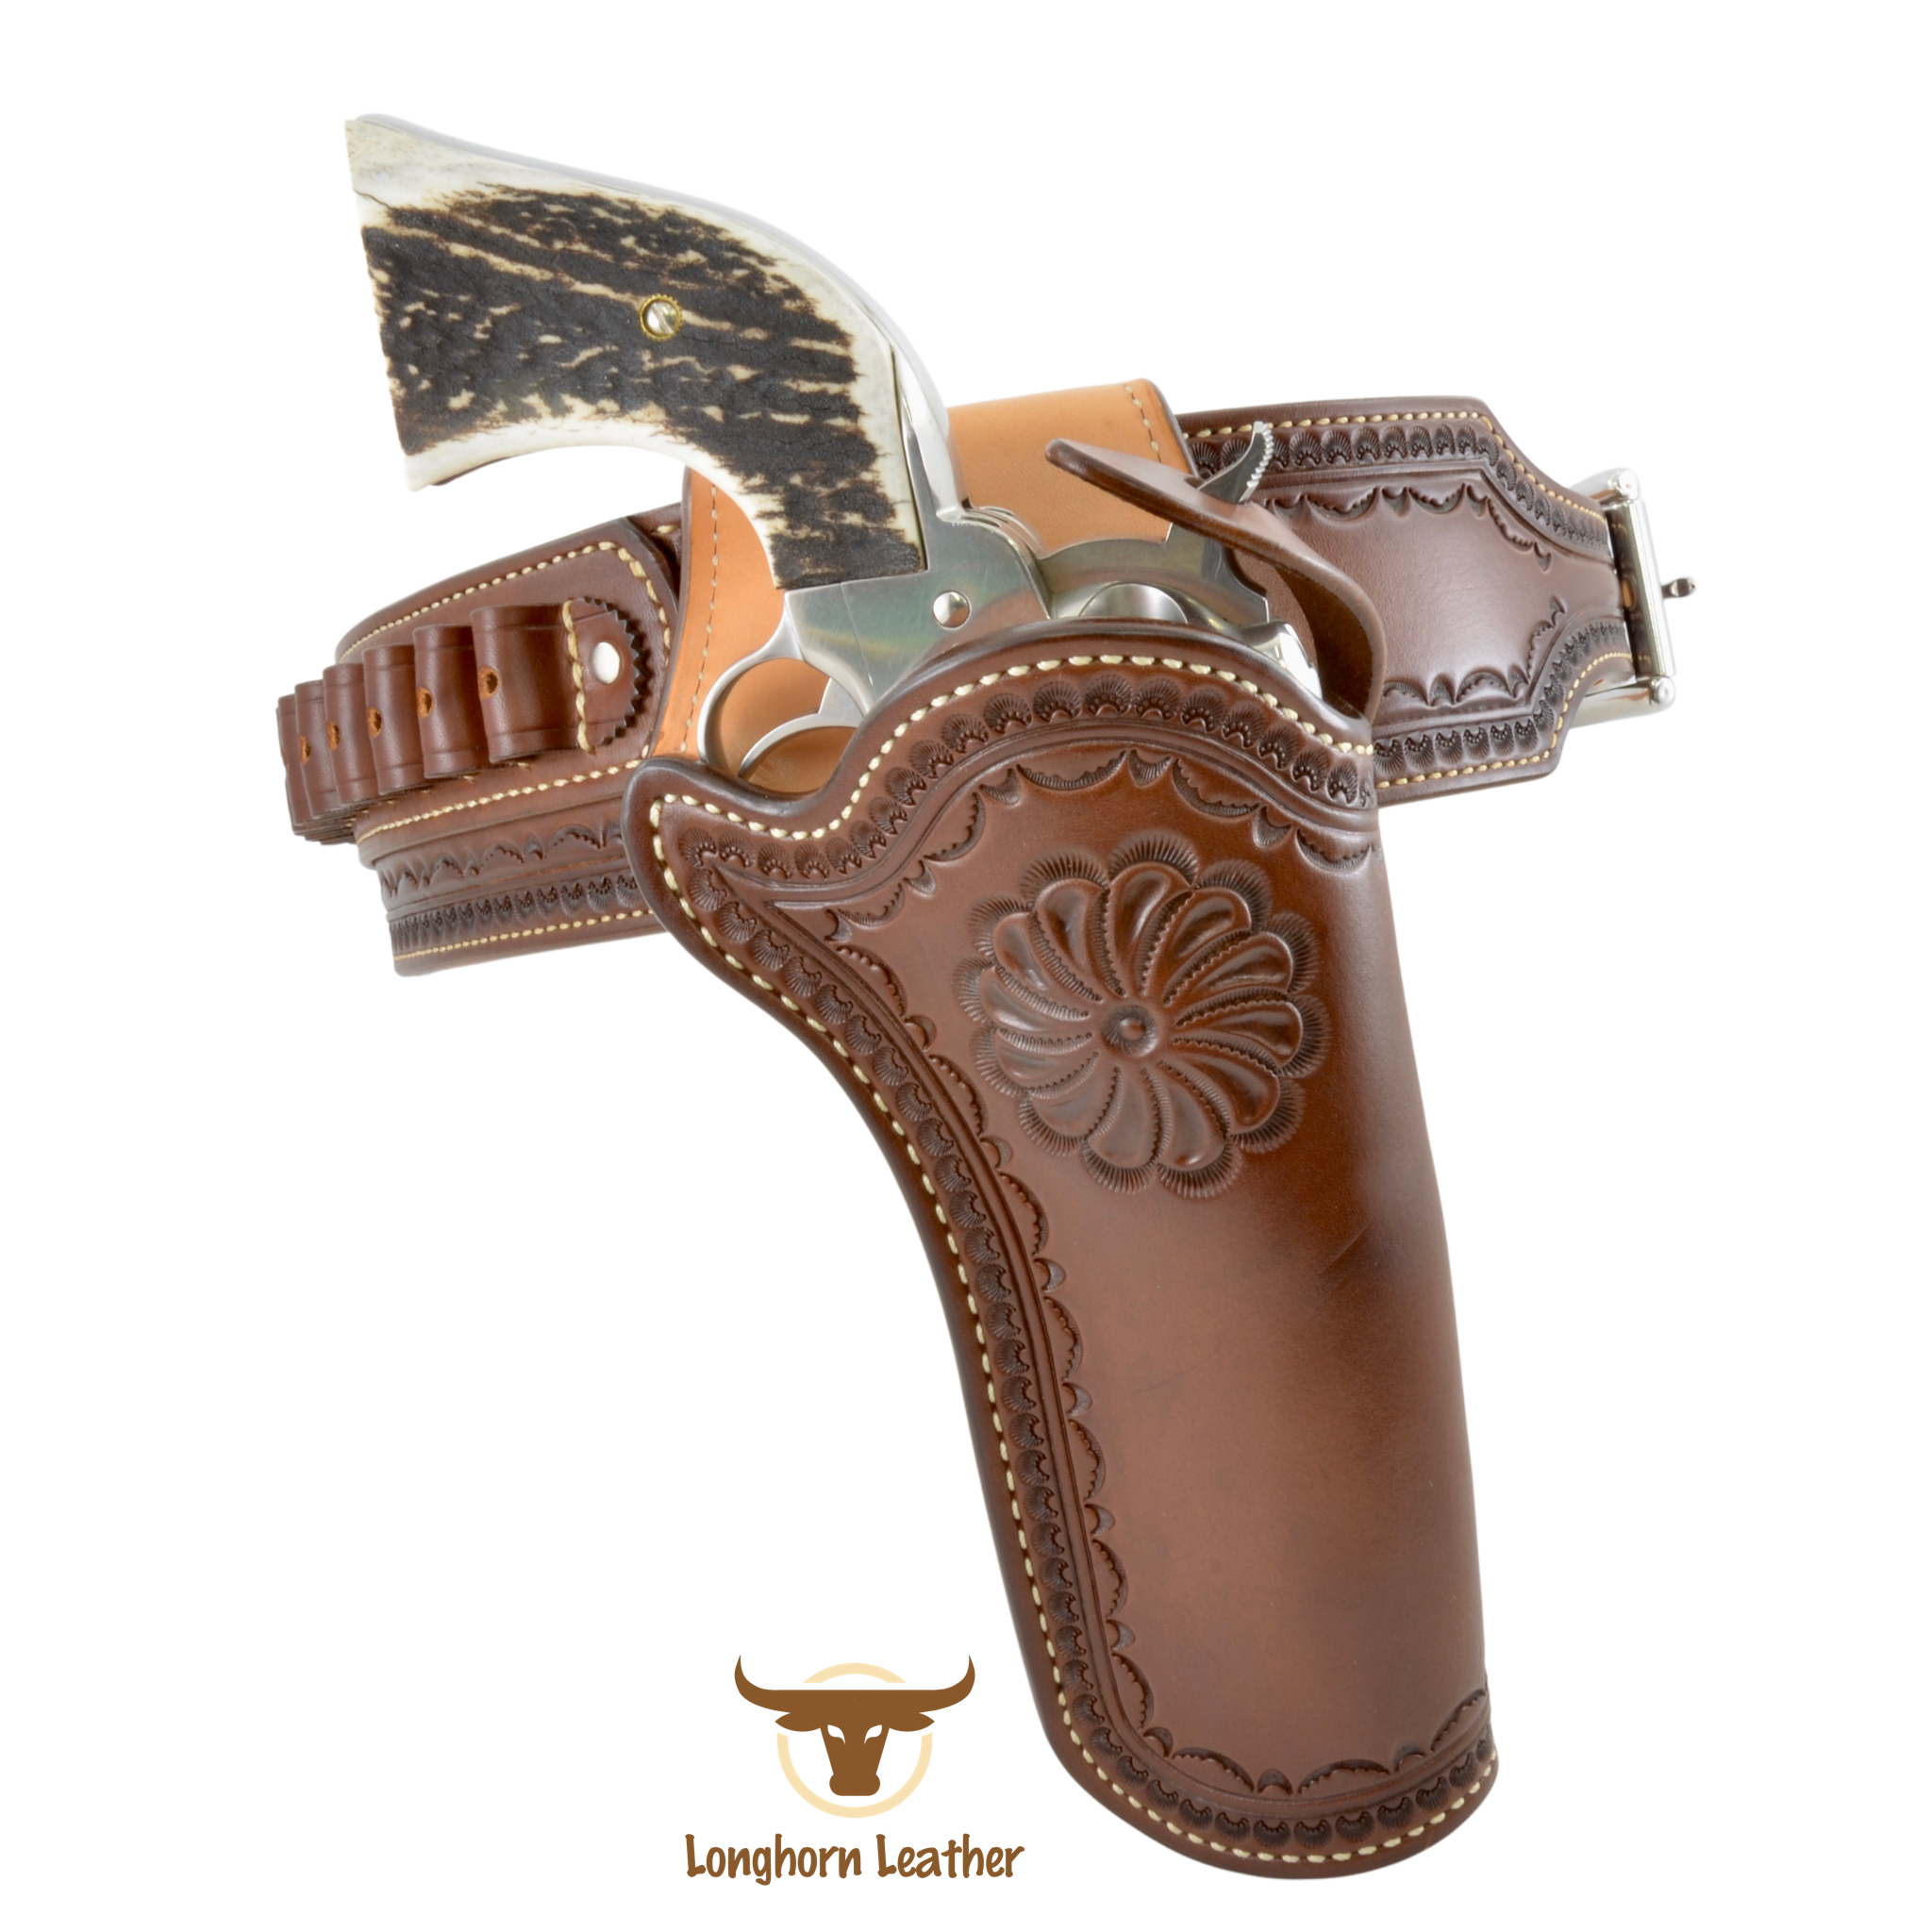 Custom leather single action holster and cartridge belt featuring the "Rio Verde" design.  Individually handcrafted at Longhorn Leather AZ